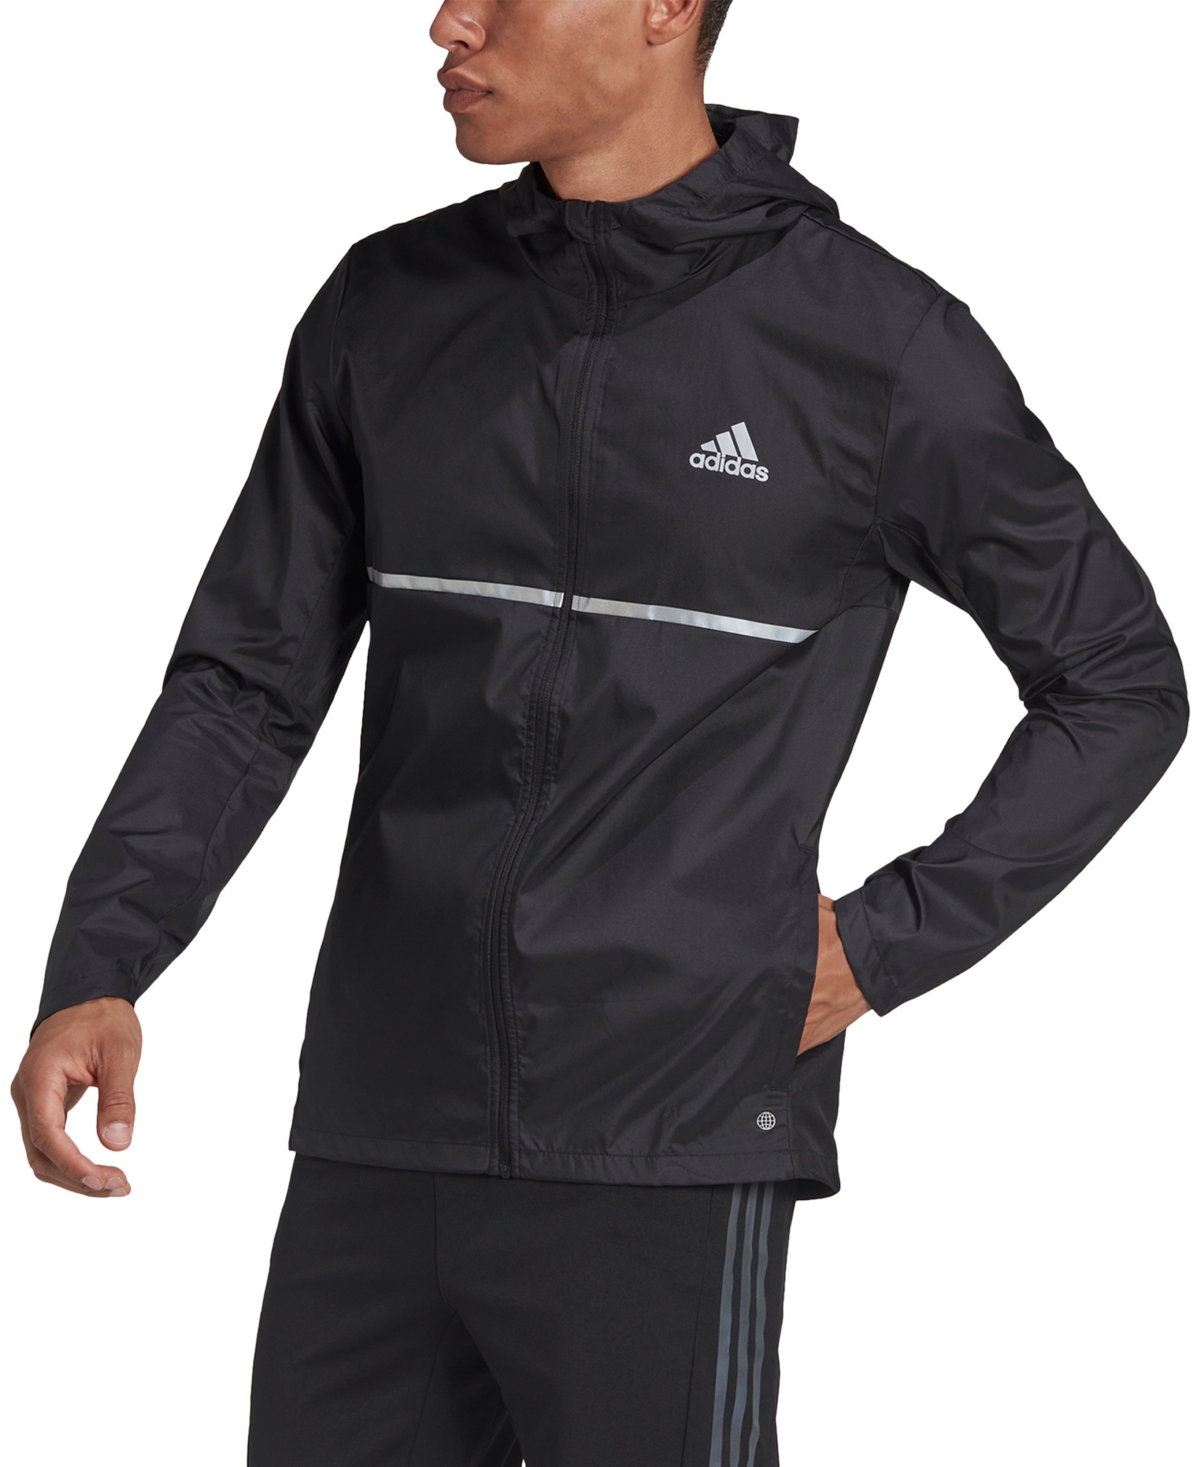 ADIDAS ORIGINALS ADIDAS MEN'S OWN THE RUN REGULAR-FIT DWR HOODED RUNNING JACKET WITH REFLECTIVE TRIM